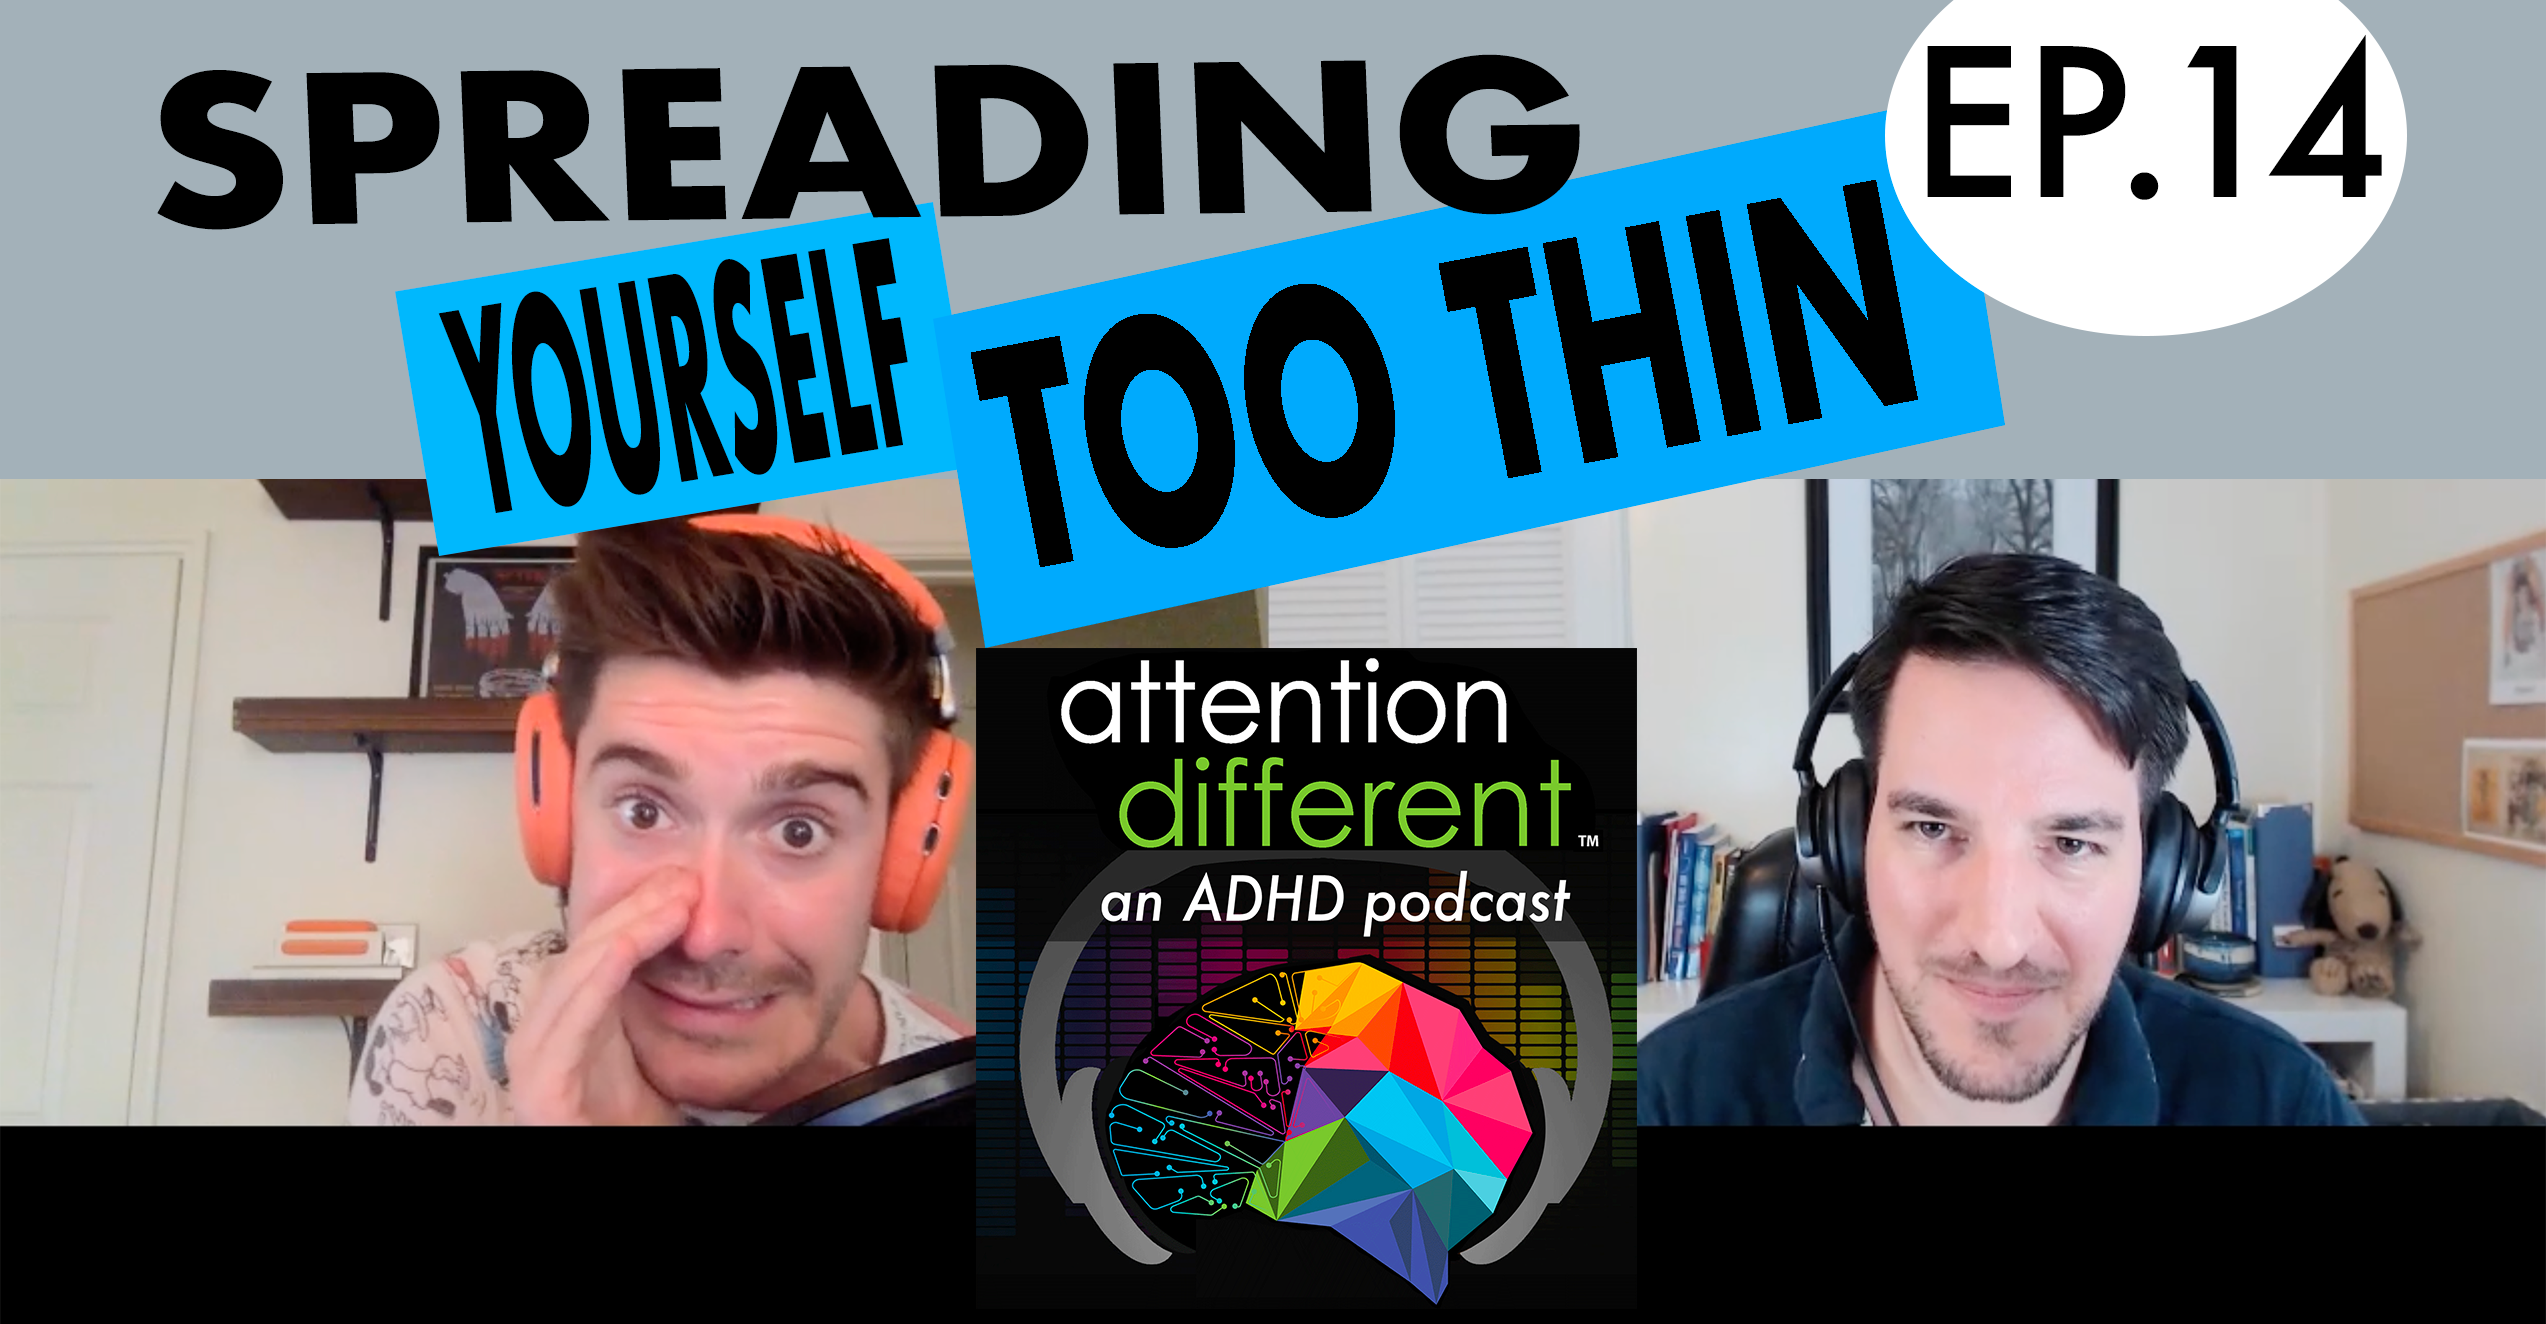 Attention Different - EP 14 Spreading Yourself Too Thin